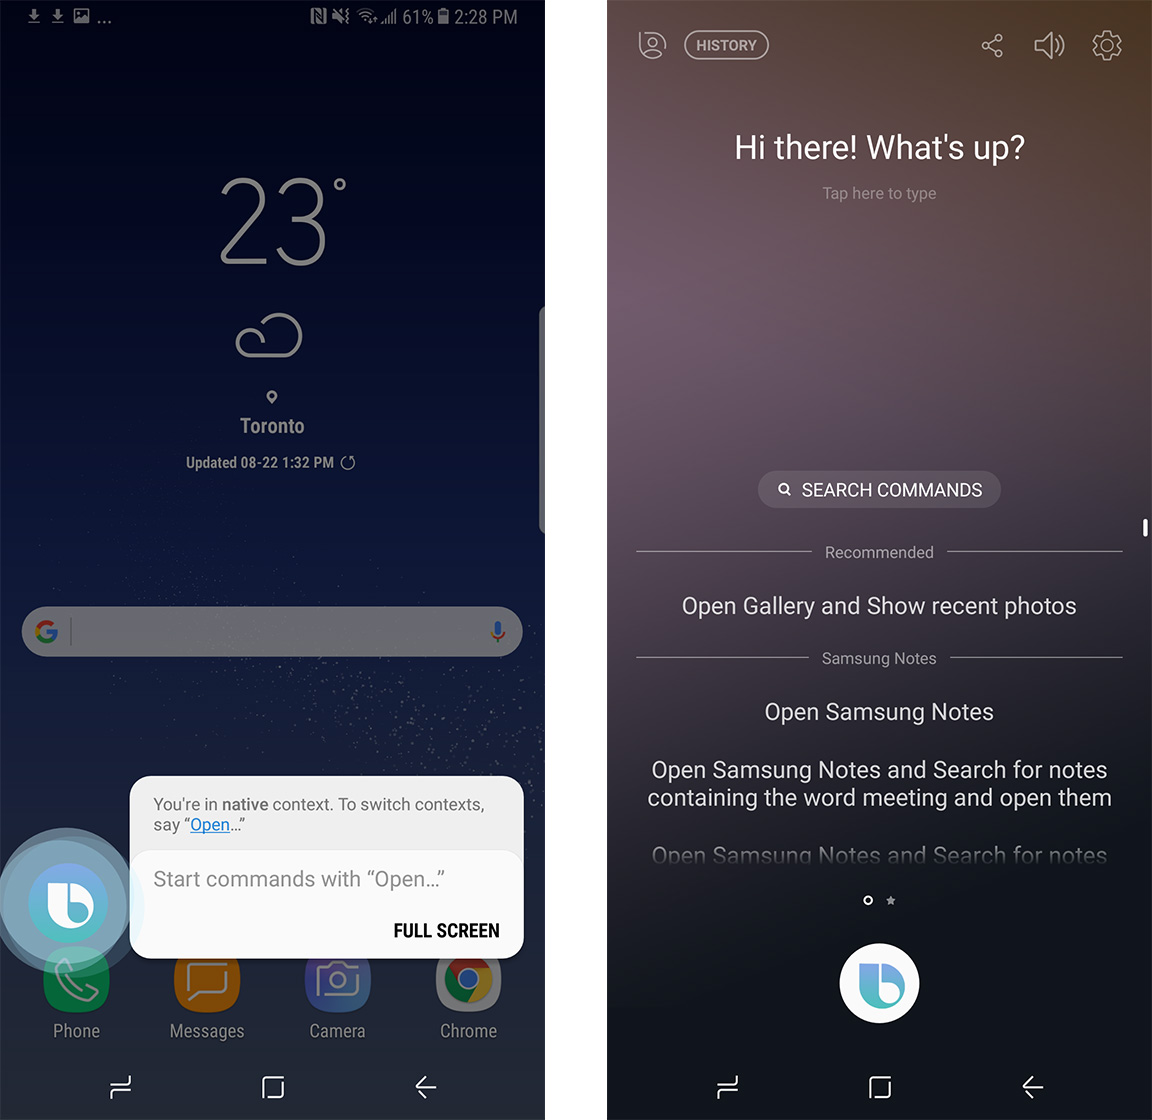 An image showing what Bixby's virtual assistant view looks like